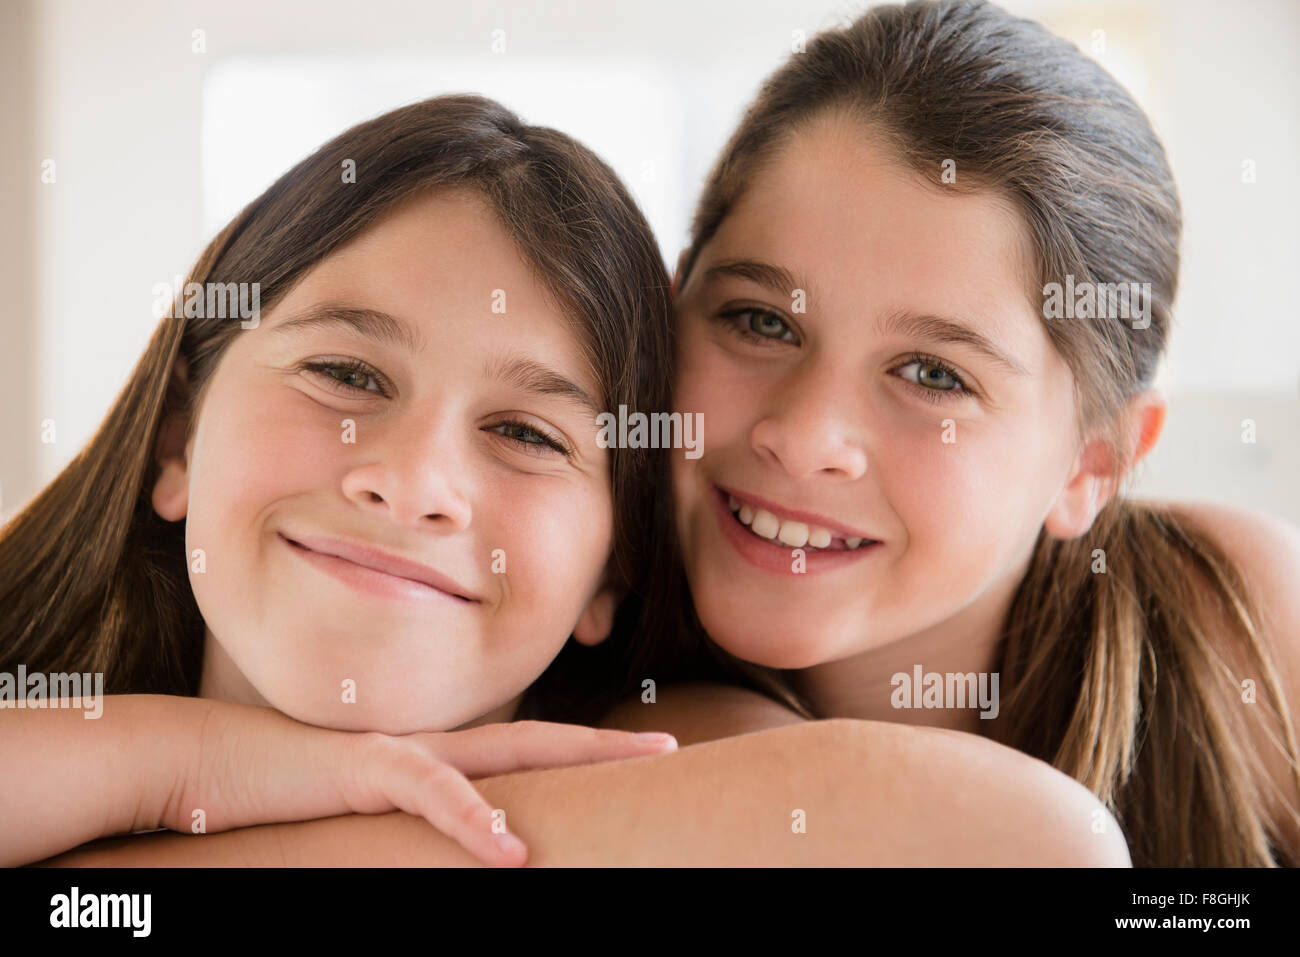 Caucasian twin sisters smiling Banque D'Images